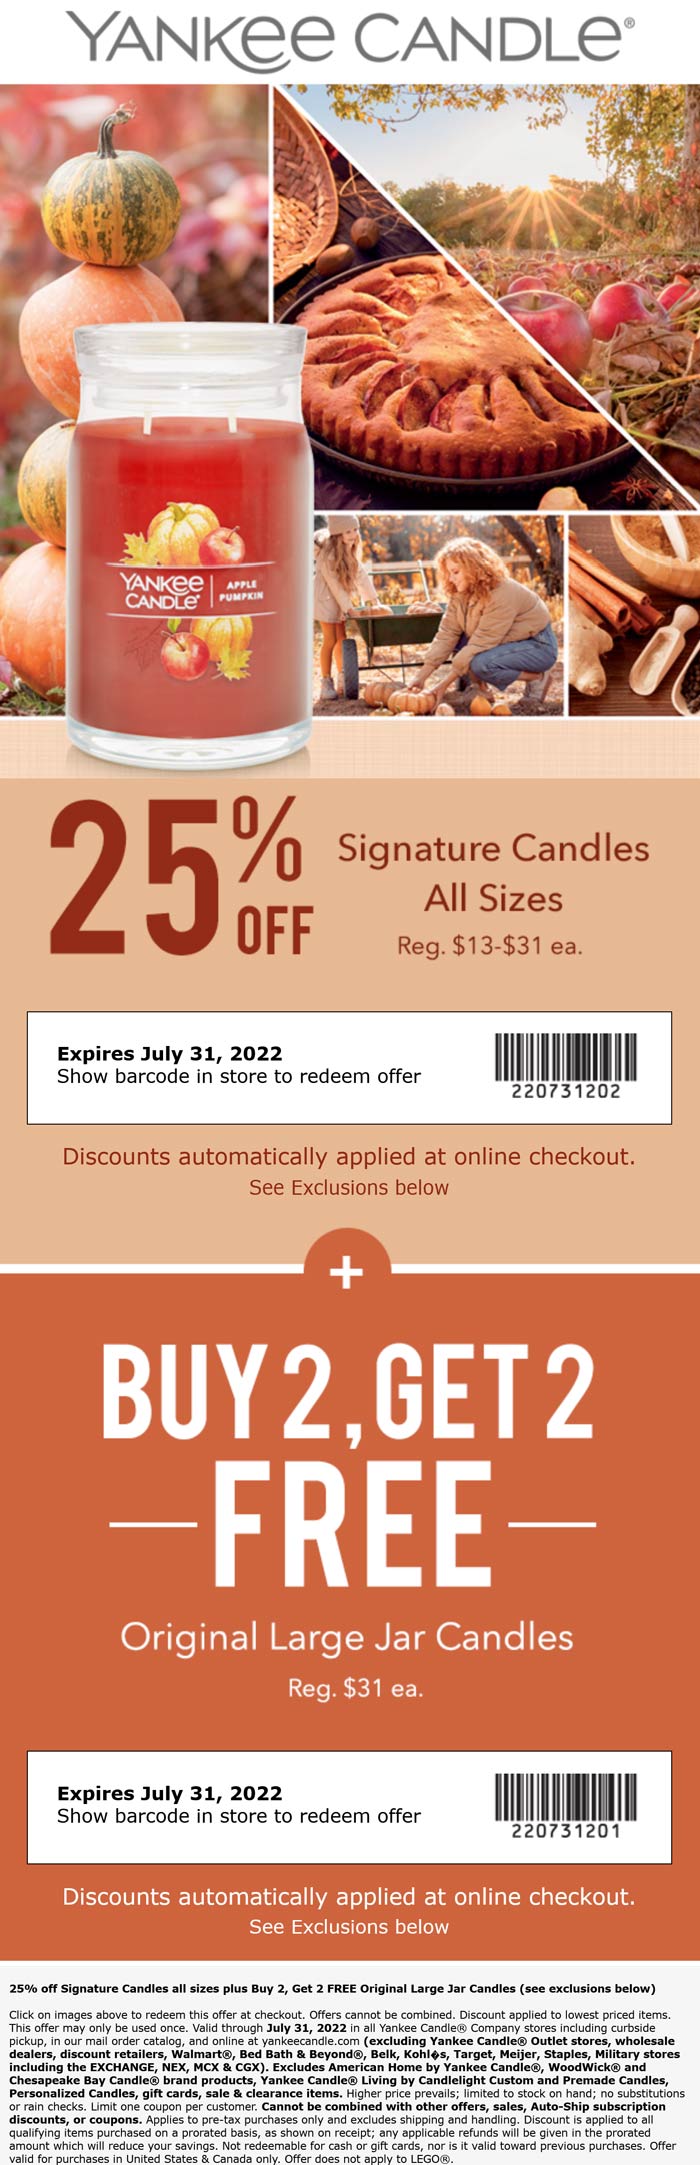 Yankee Candle stores Coupon  4-for-2 & 25% off at Yankee Candle, ditto online #yankeecandle 